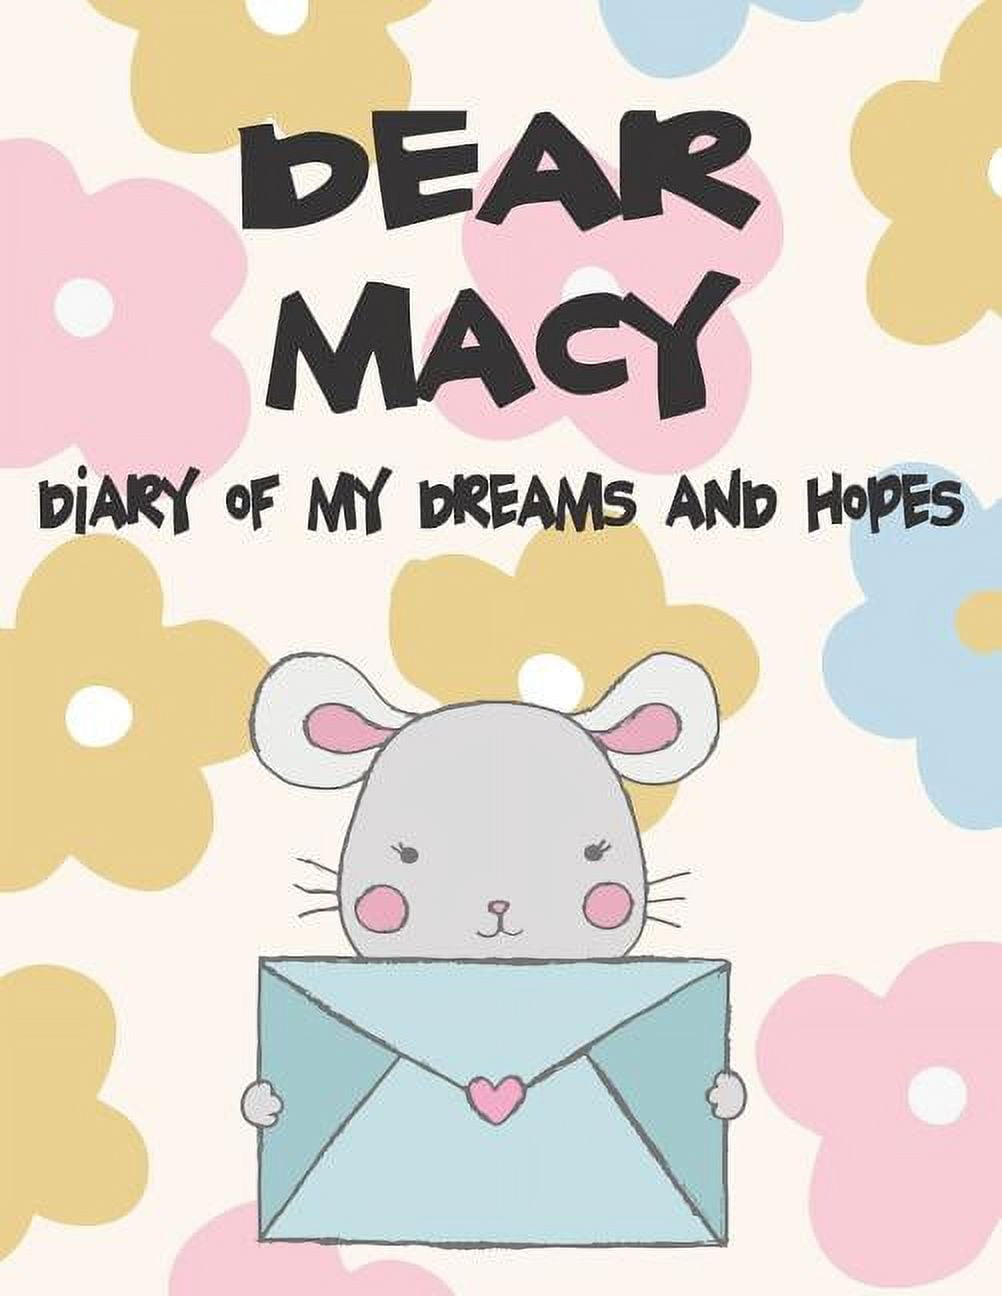 Claire's Orange Hamster Girls Diary with Lock and Key - Plush Cover Lined  Paper Kids Notebook Writing Journal for Girls Ages 8-12 - Size 5.5x7.5 